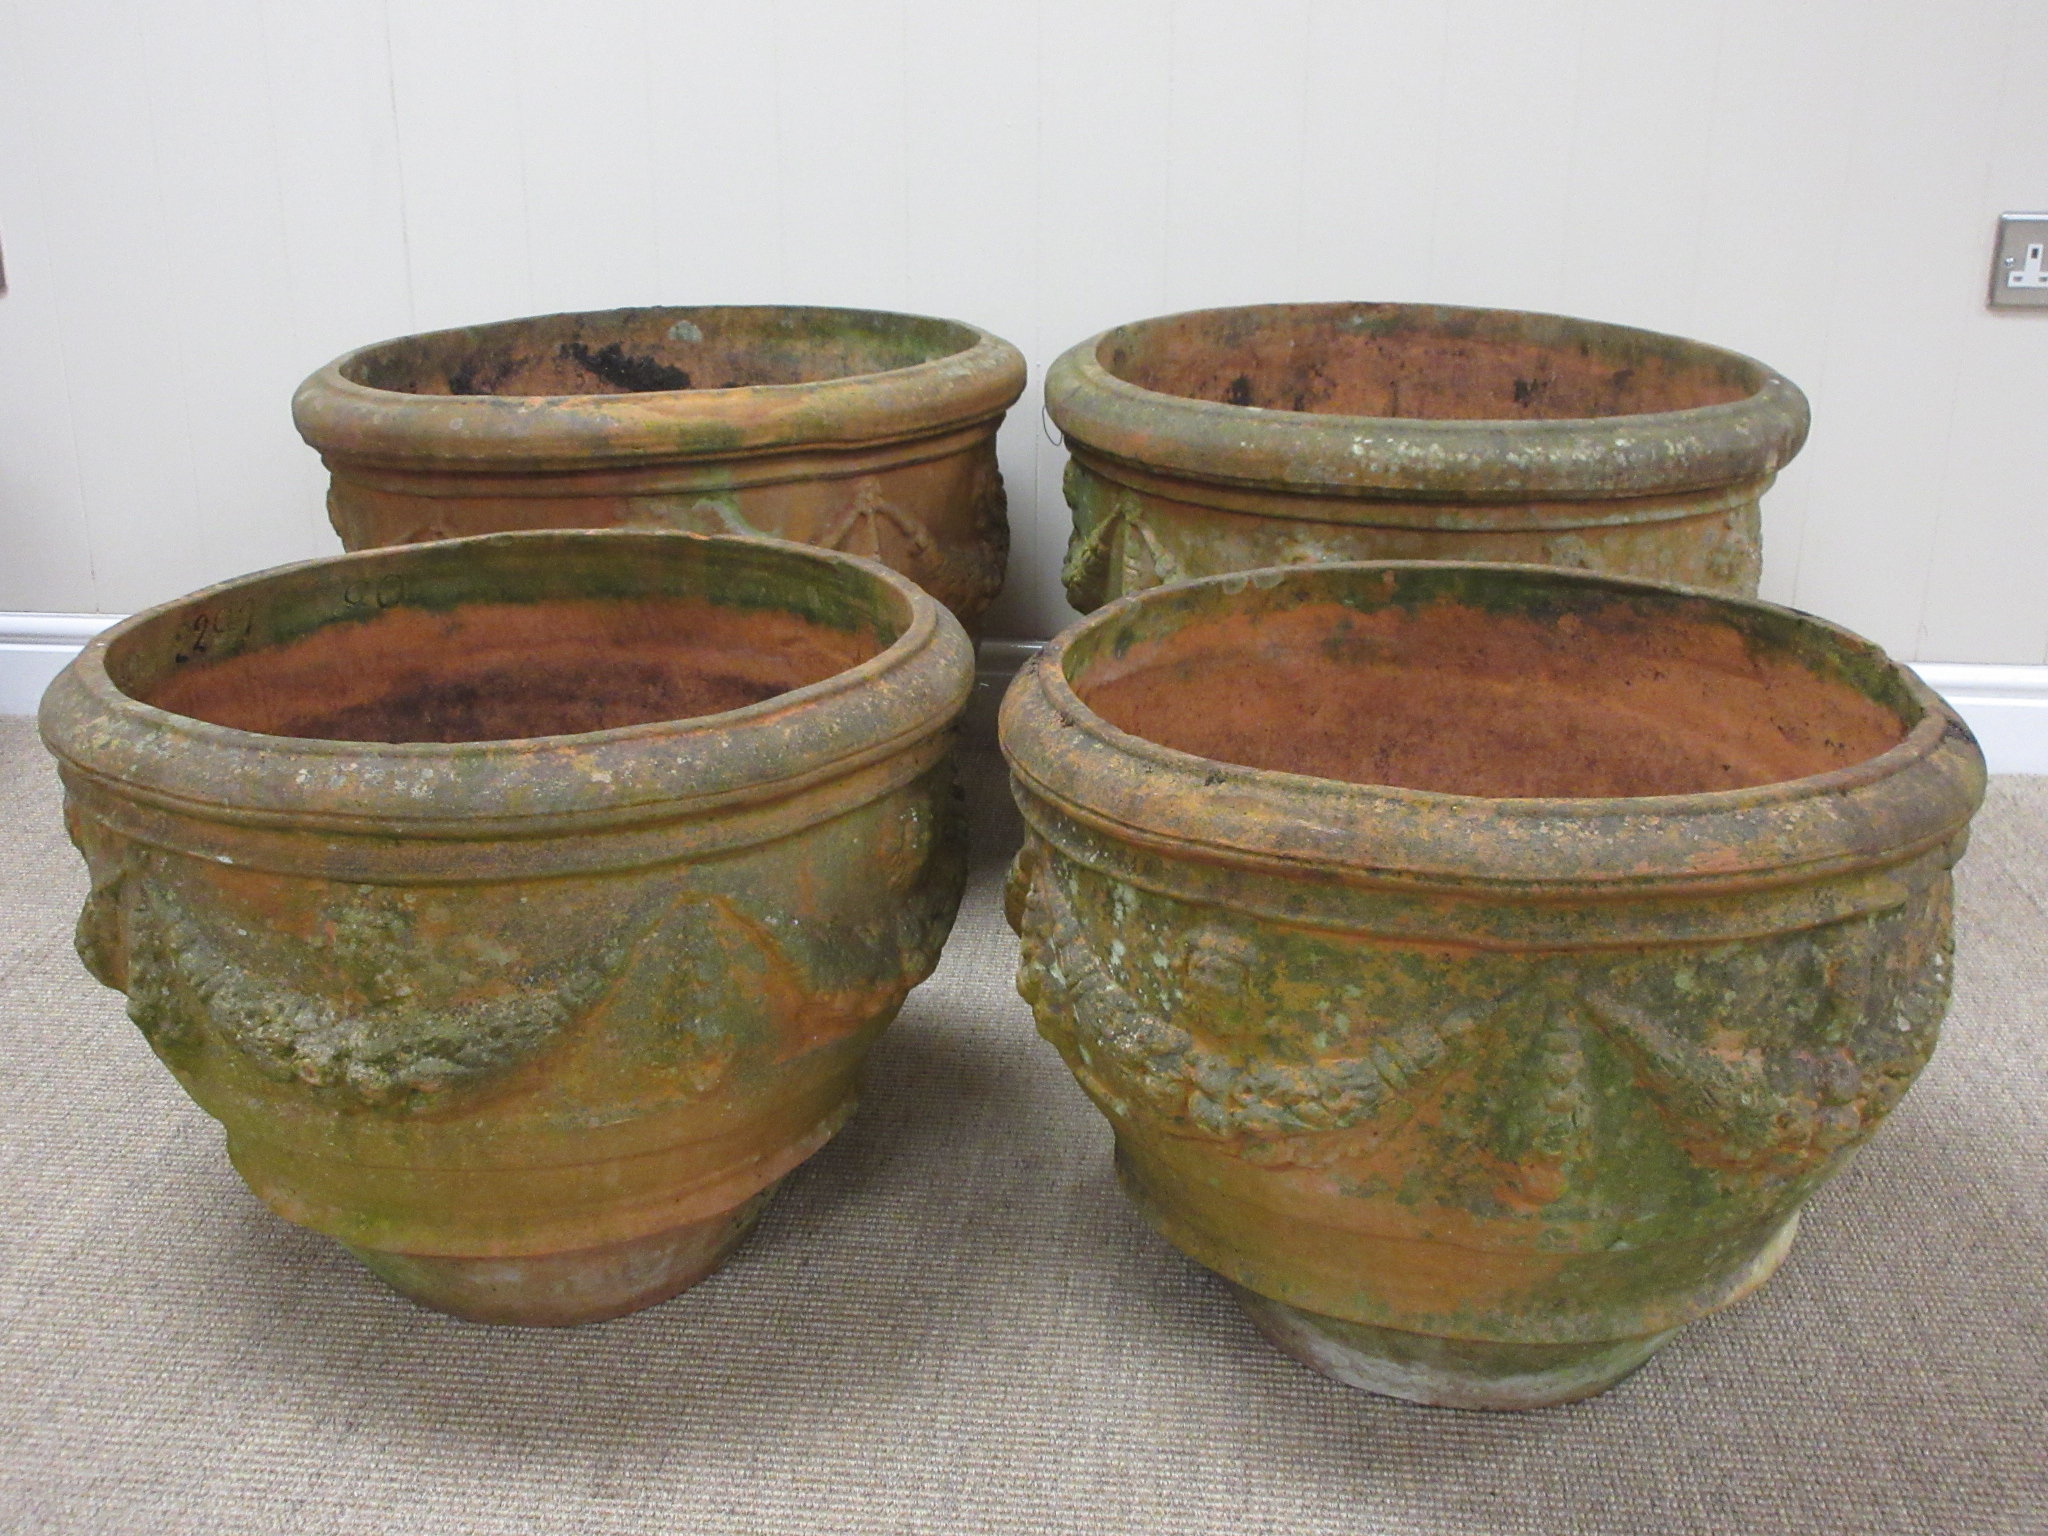 Four terracotta Flower Pots with swag and mask designs, A/F - Image 2 of 2